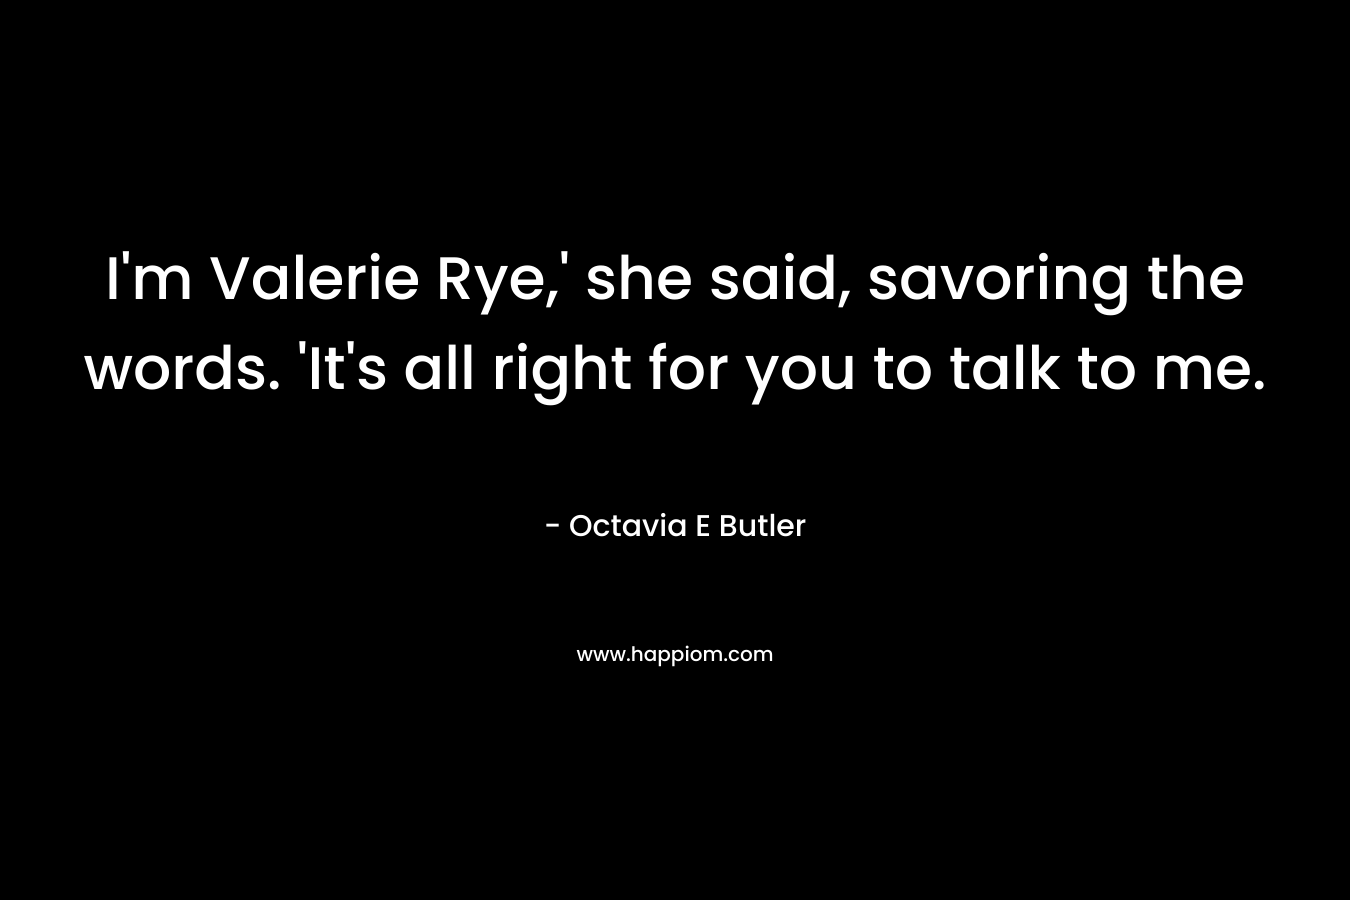 I’m Valerie Rye,’ she said, savoring the words. ‘It’s all right for you to talk to me. – Octavia E Butler